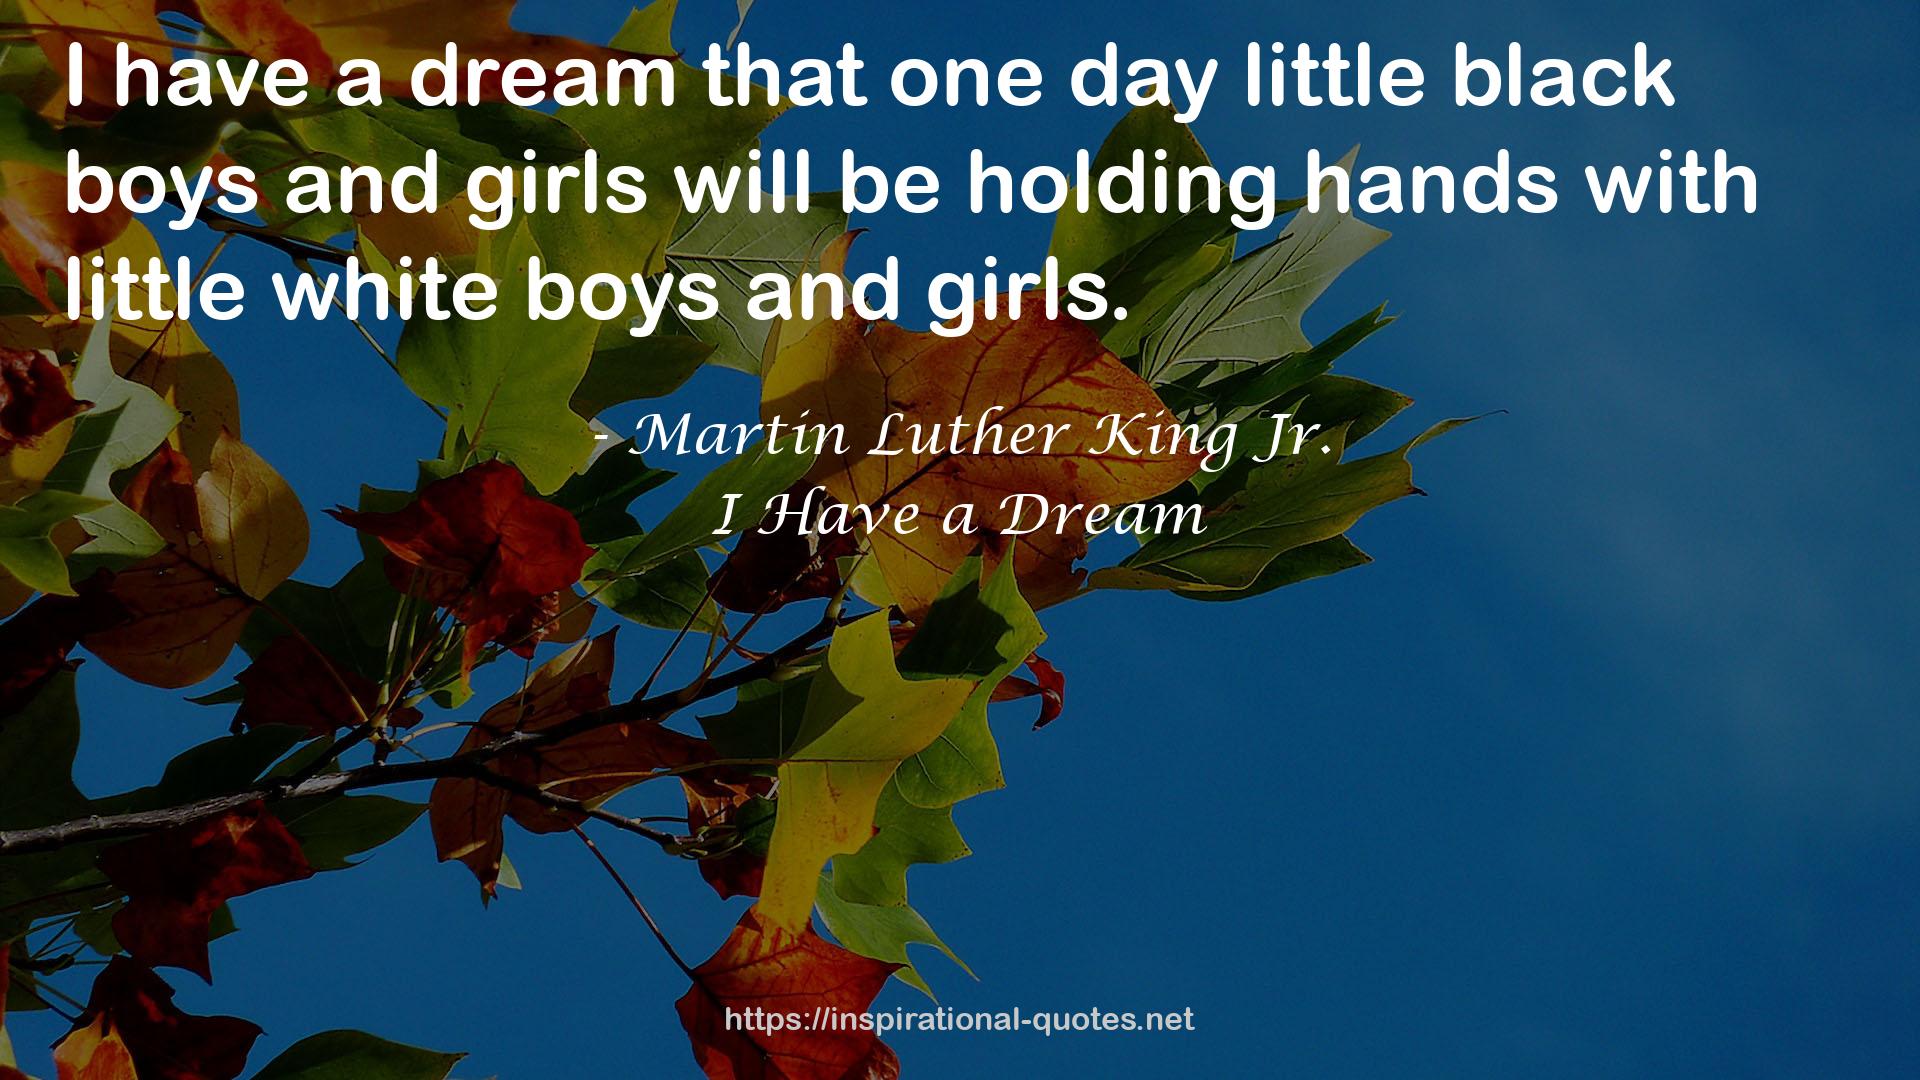 I Have a Dream QUOTES